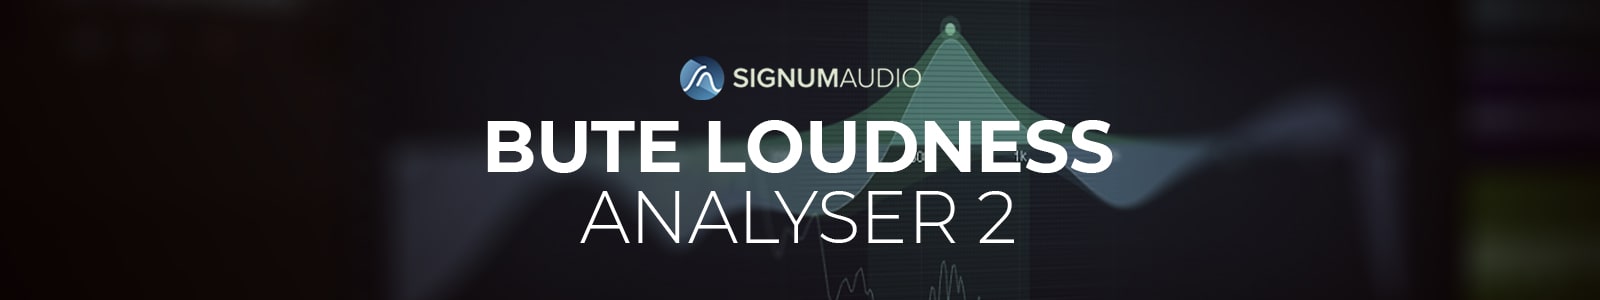 BUTE Loudness Analyser 2 Stereo by Signum Audio